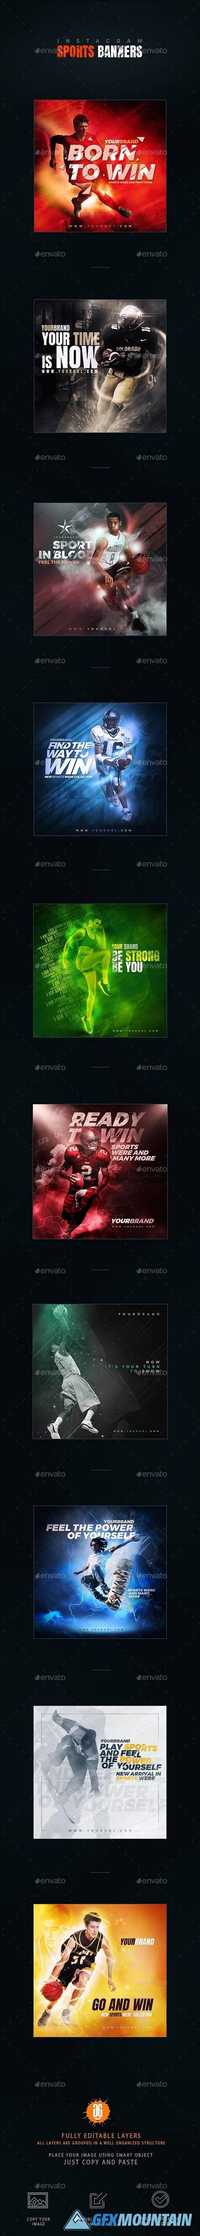 10 Sports Instagram Banners 20438848